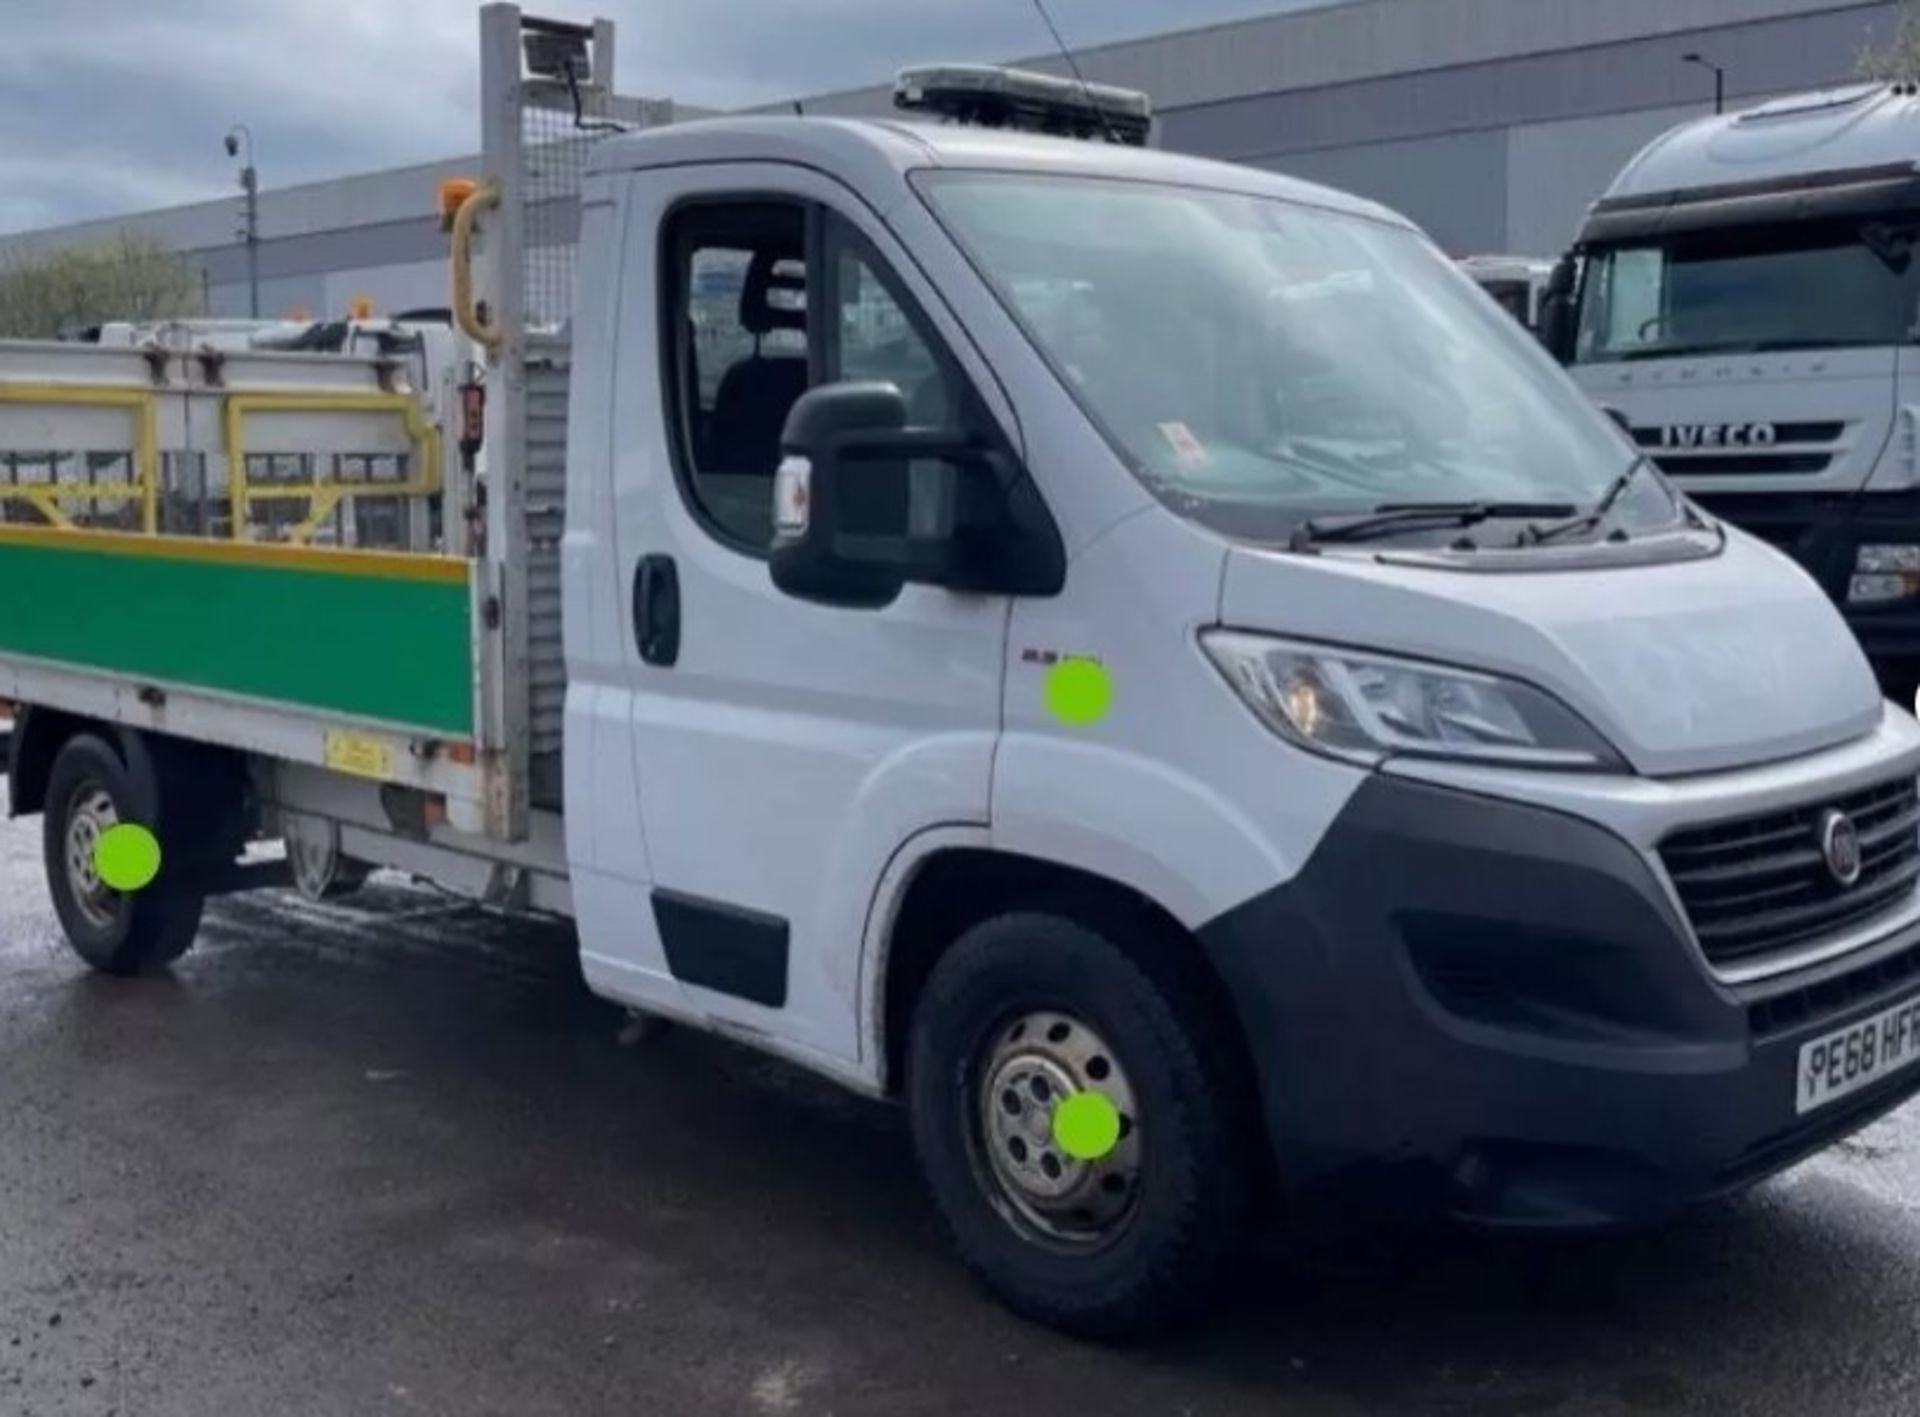 2018-68REG FIAT DUCATO 35 MULTIJET LWB DROP SIDE - YOUR RELIABLE WORKHORSE READY FOR ANY TASK